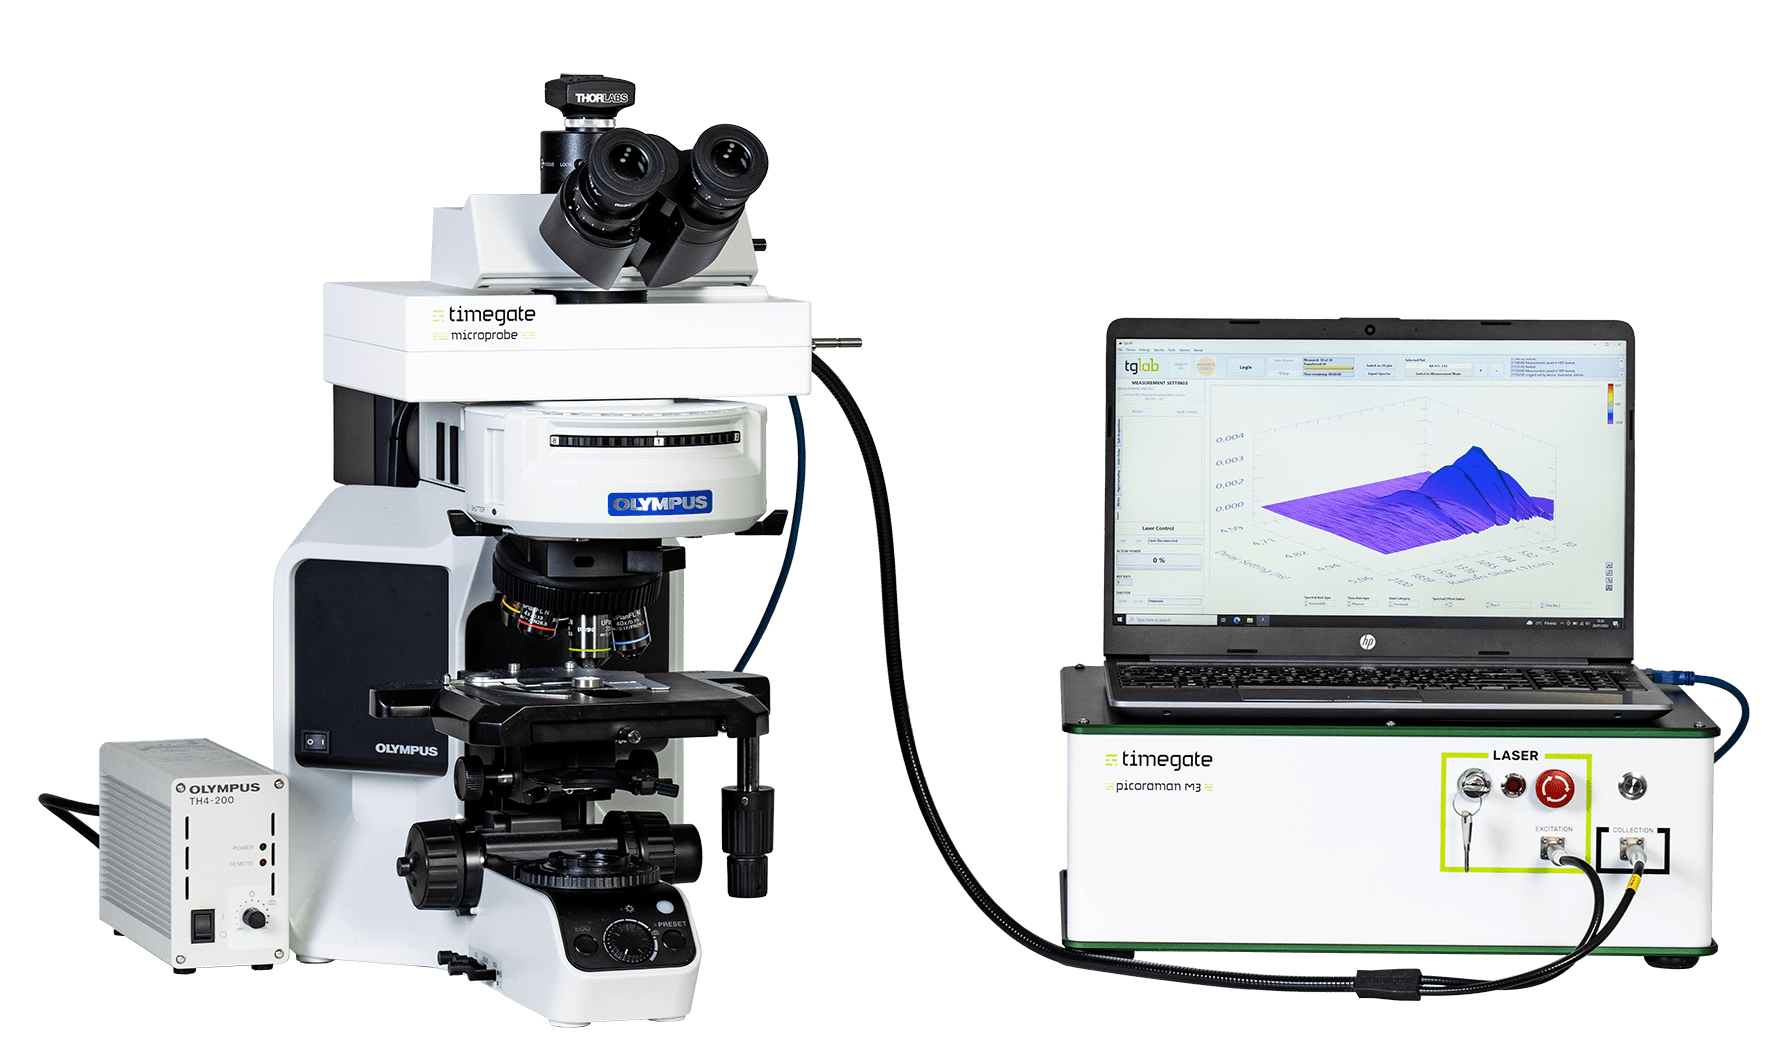 PicoRaman_M3_ with_Microprobe_and_Olympus_microscope-1